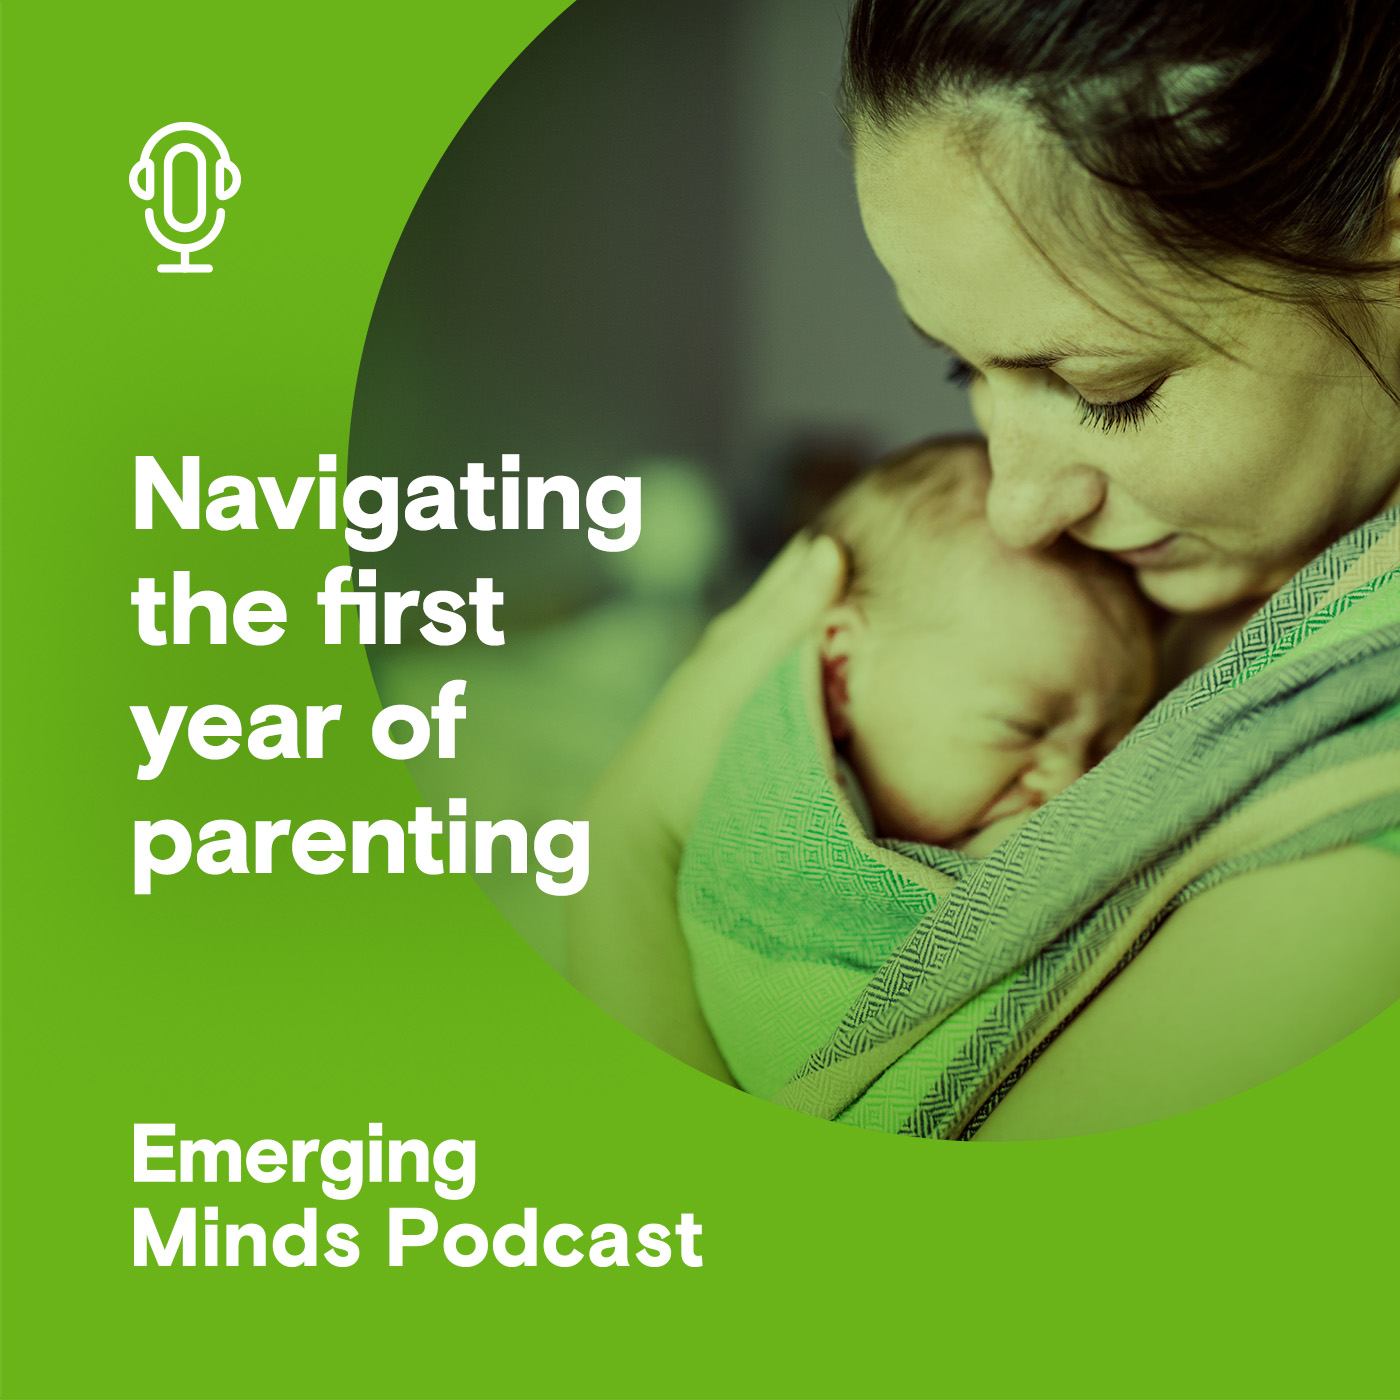 Navigating the first year of parenting